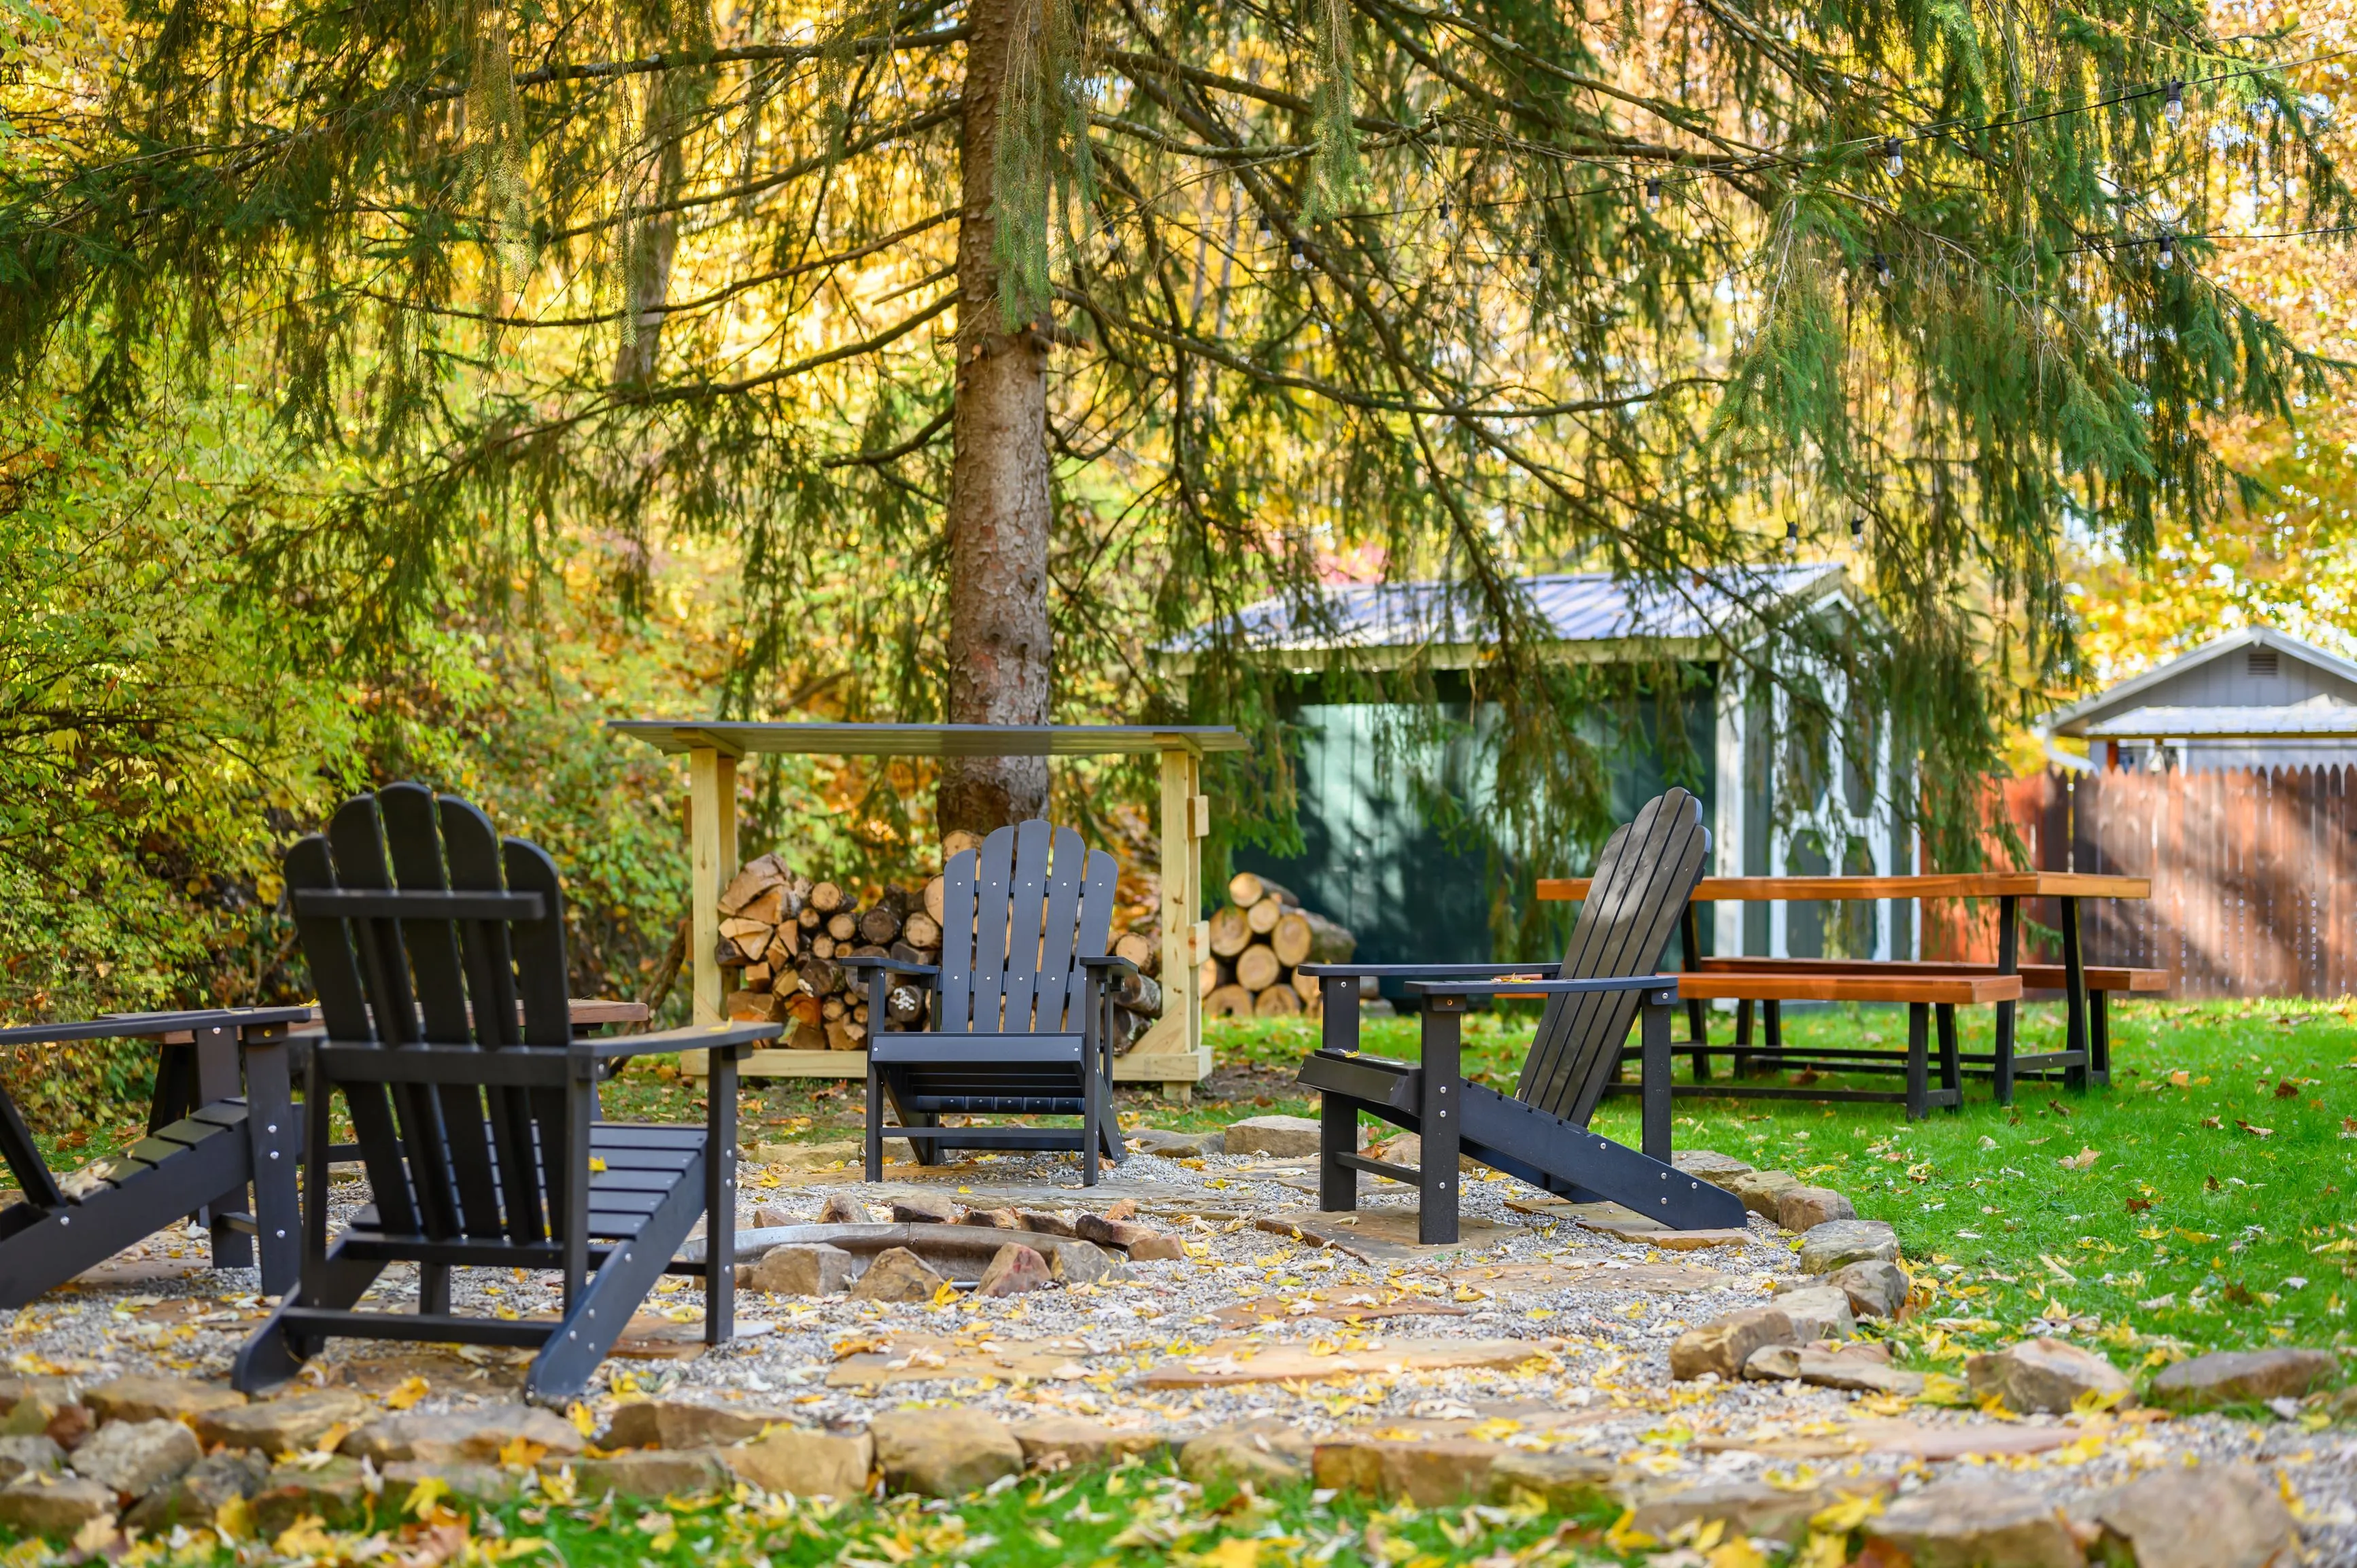 A peaceful outdoor seating area with Adirondack chairs around a fire pit, set against a backdrop of autumn foliage and a rustic wooden shed.